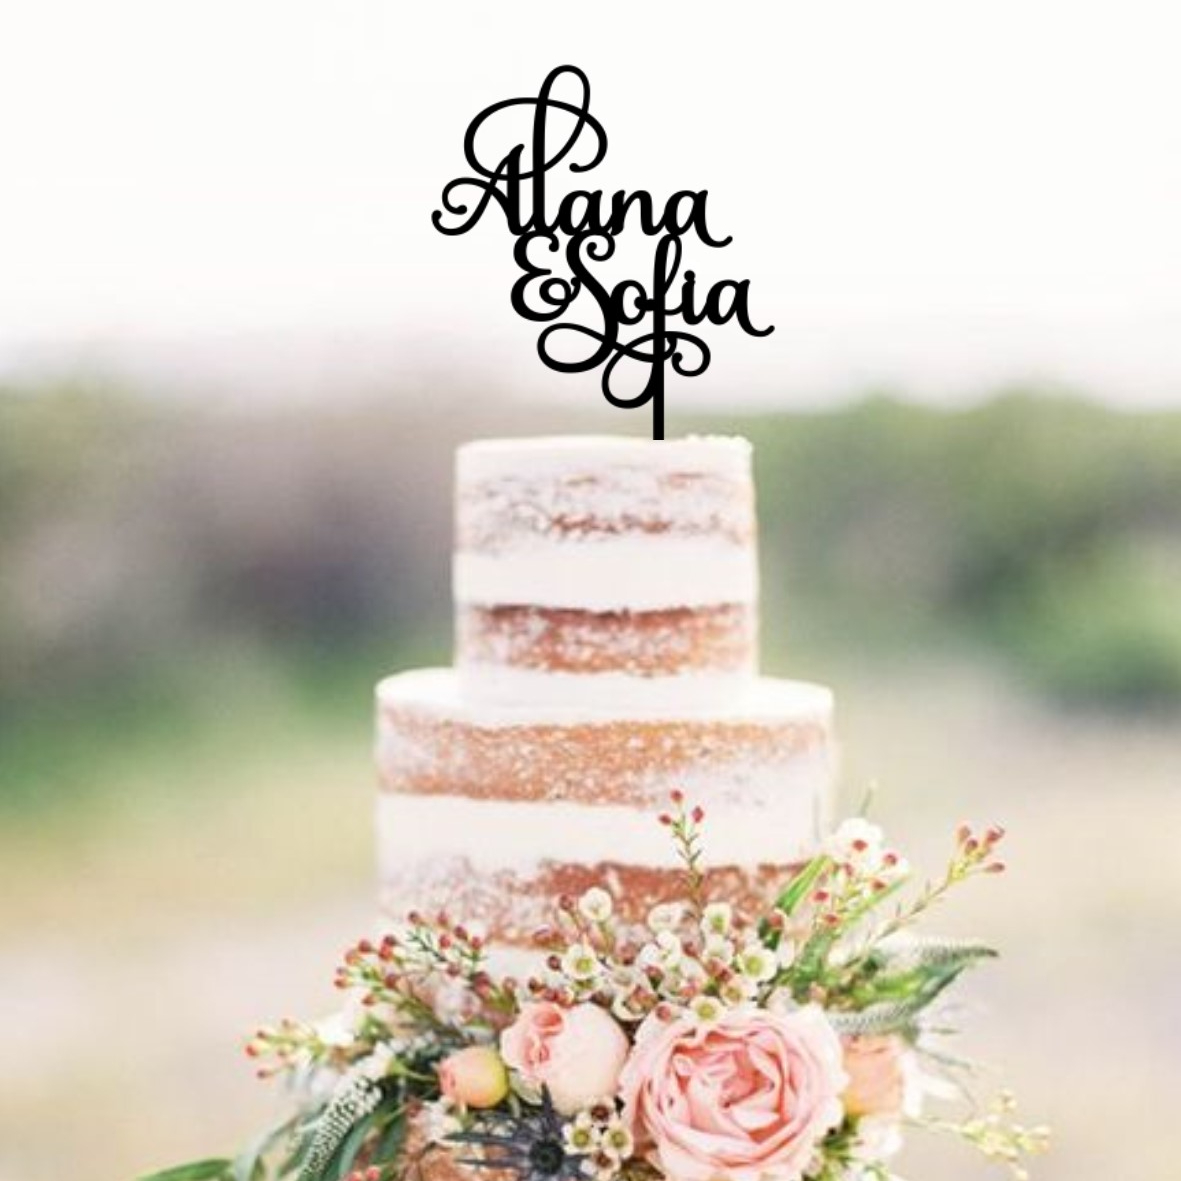 Two Names Cake Topper